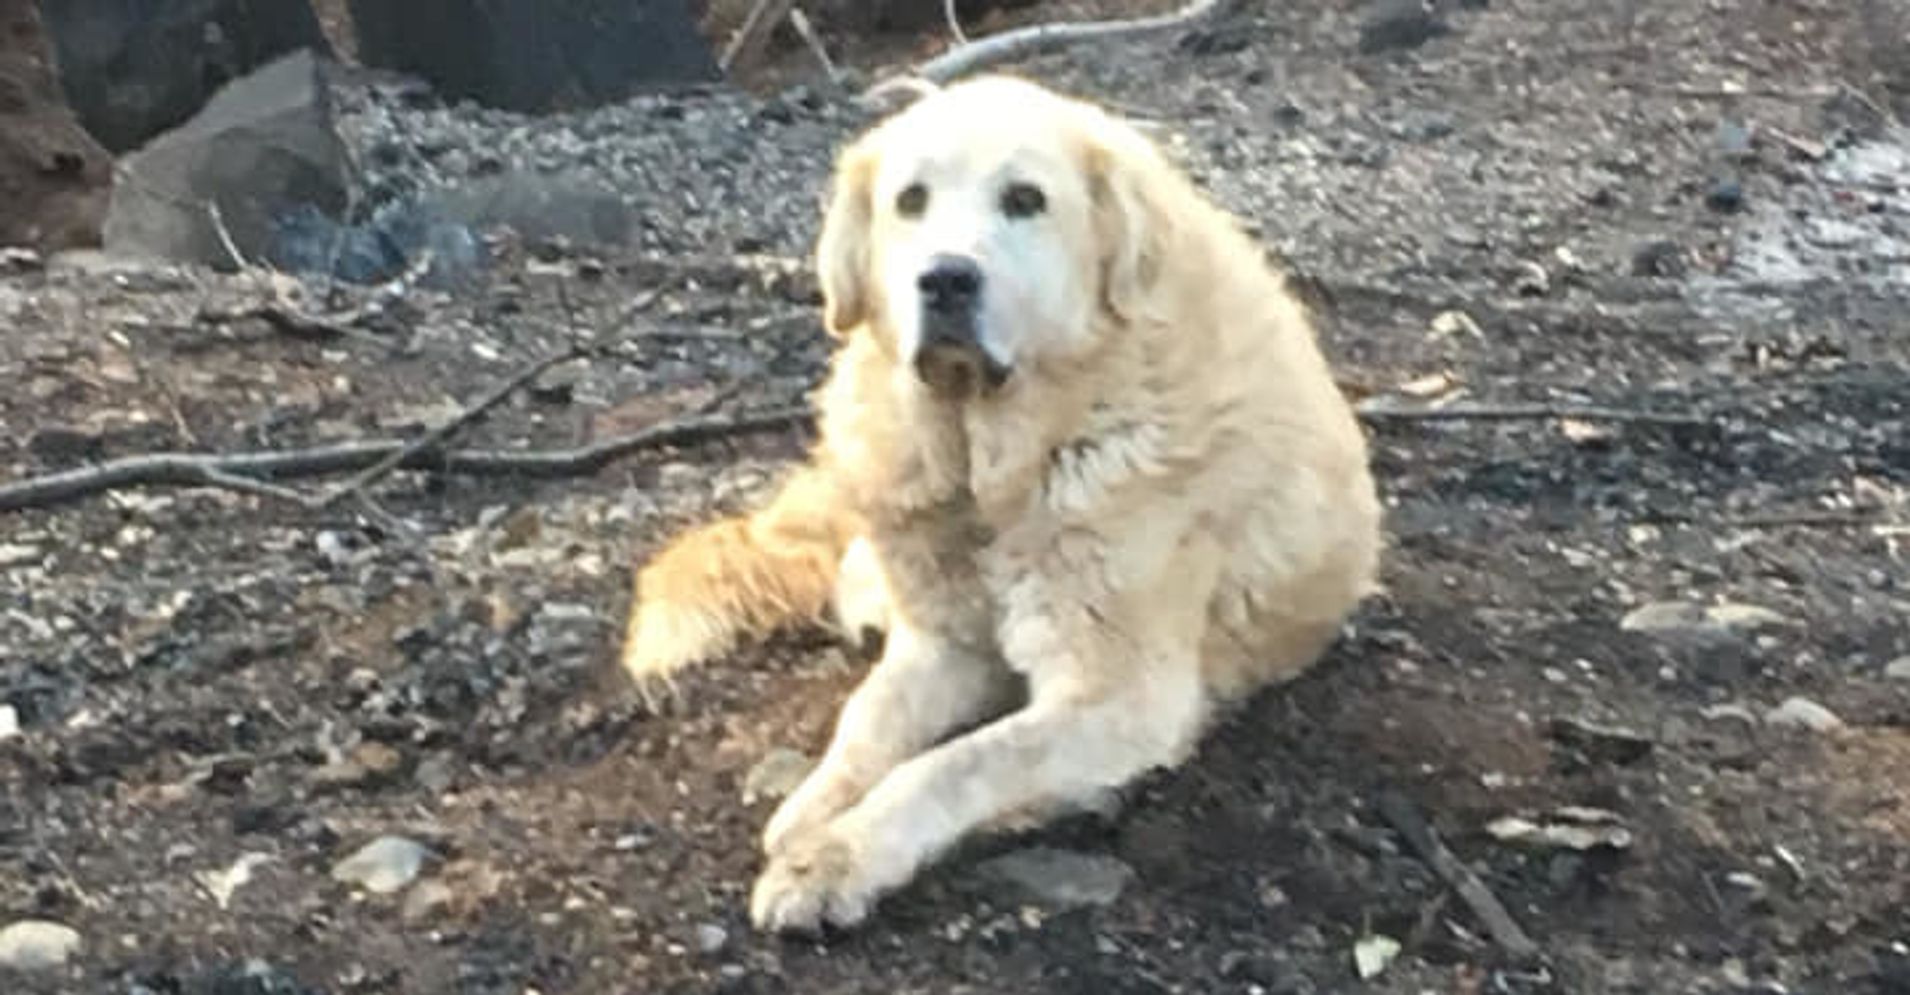 Loyal Dog Found Guarding Home Weeks After Wildfire Burned It To The Ground | HuffPost1910 x 995